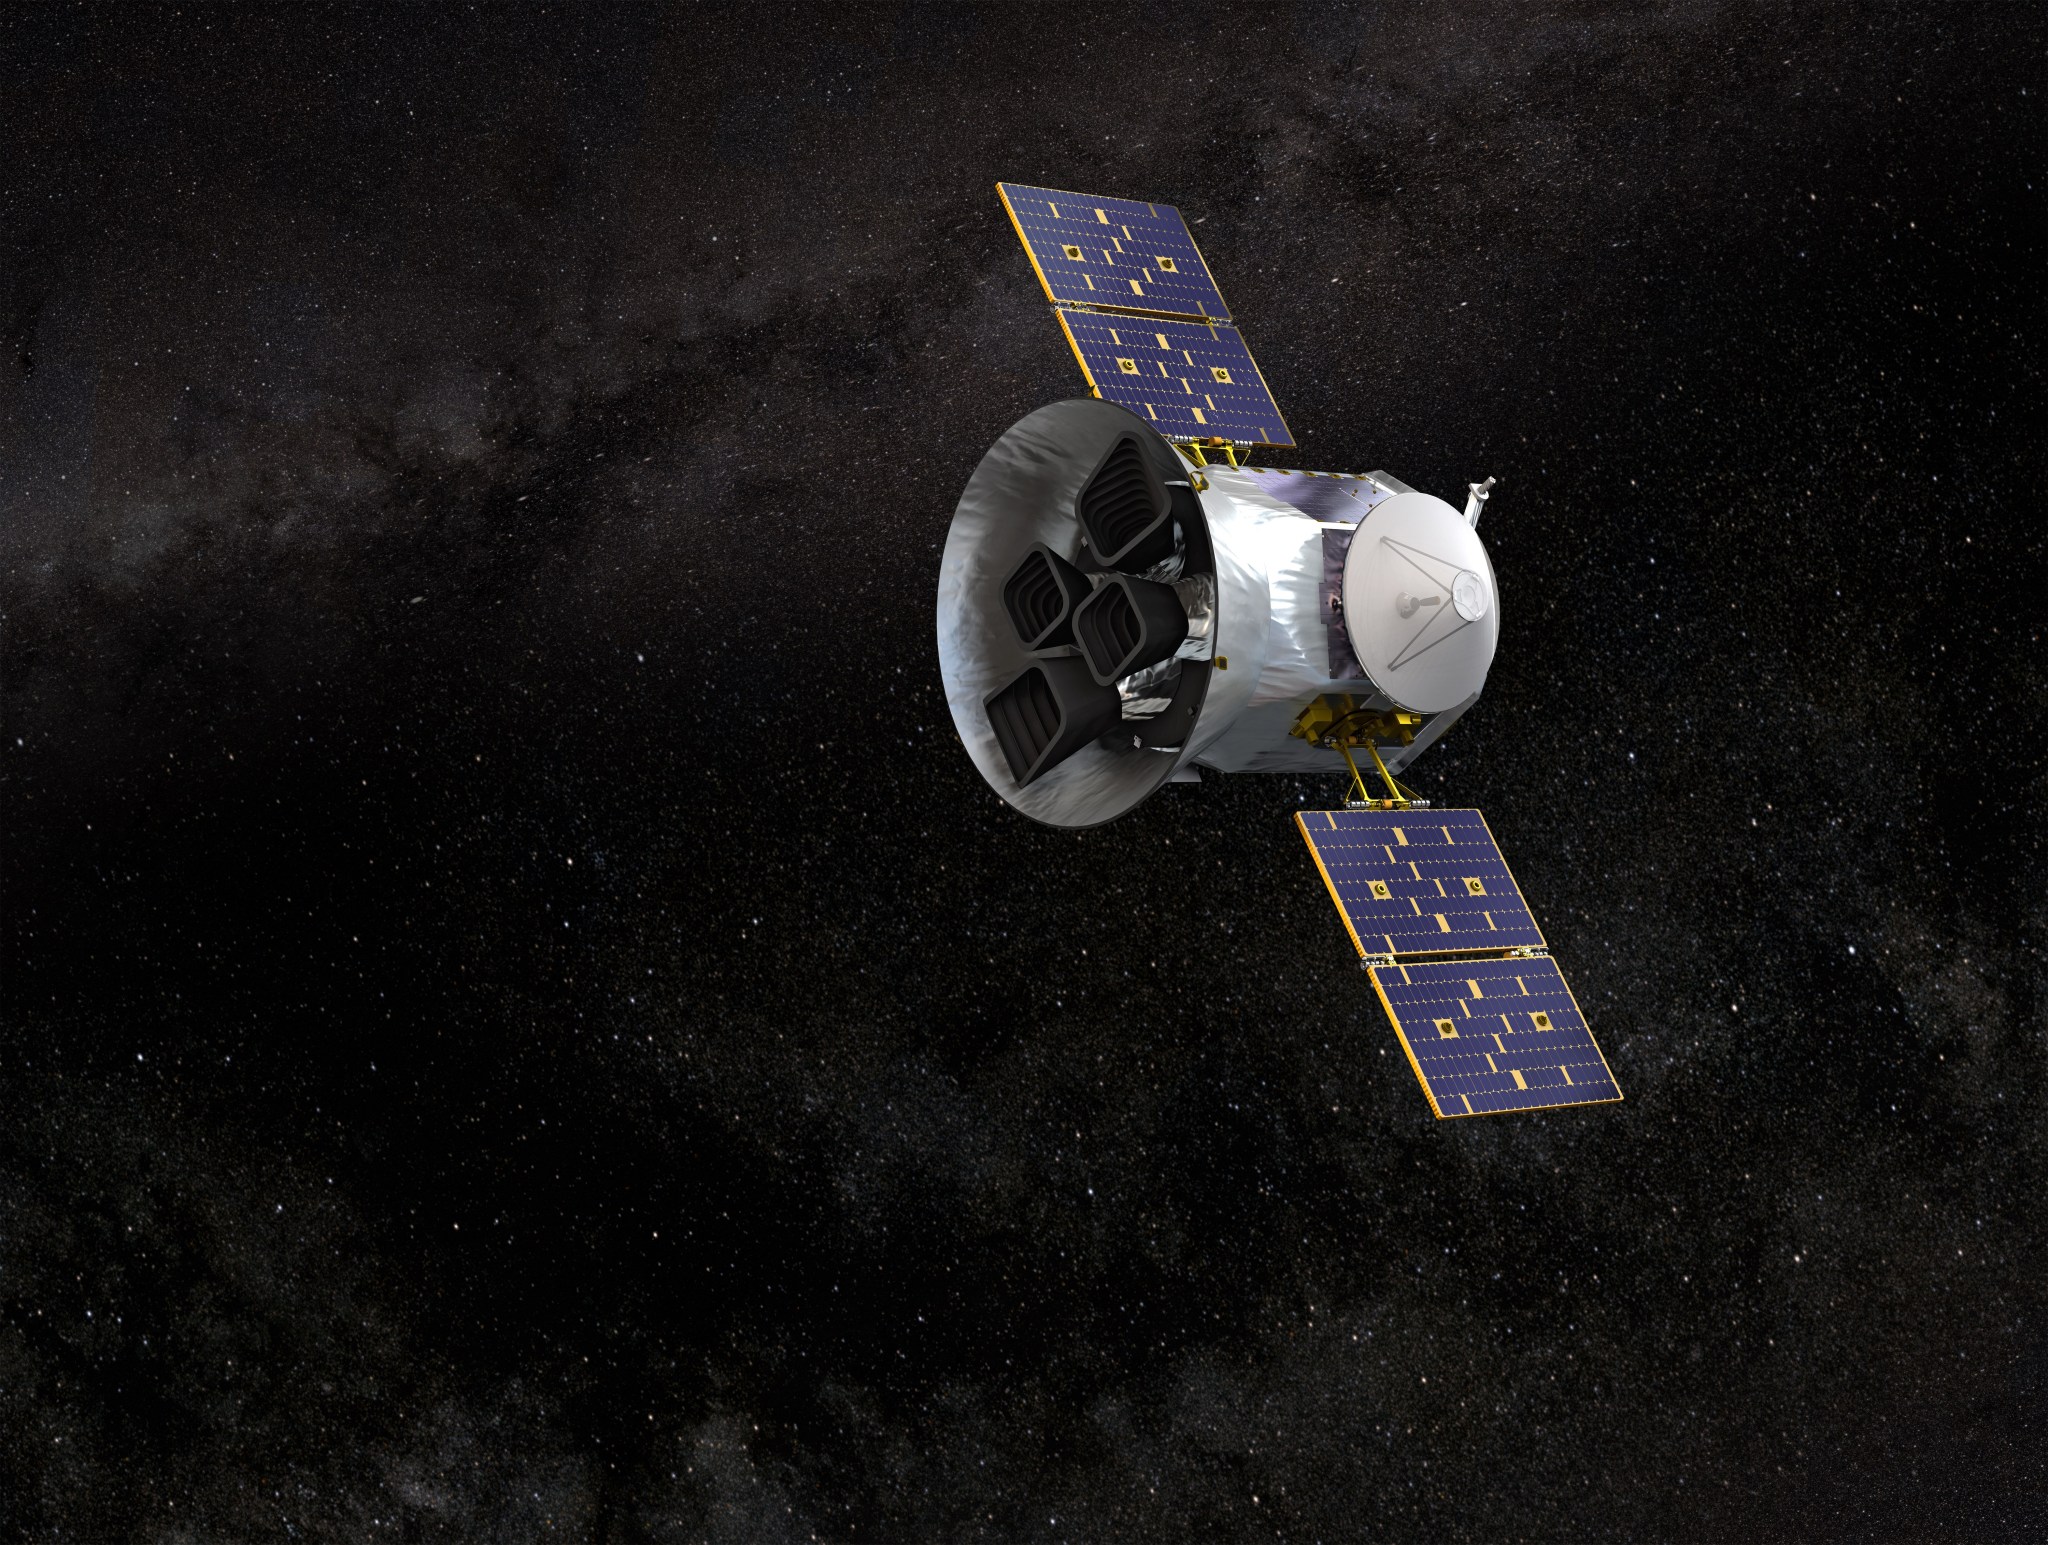 Conceptual image of the TESS mission